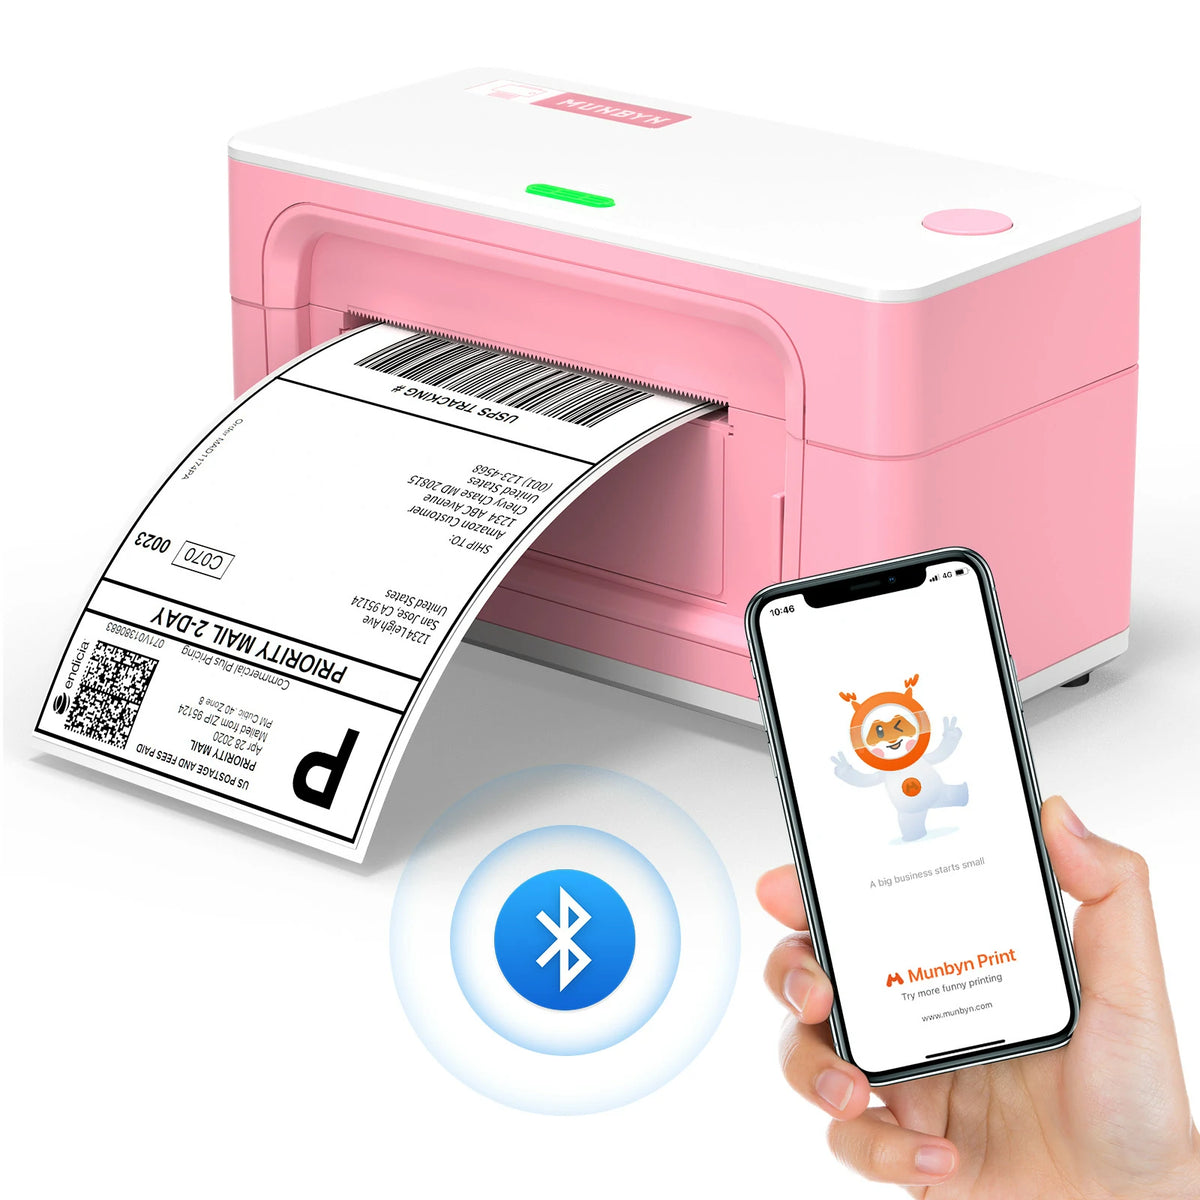 With its advanced Bluetooth connectivity, MUNBYN Upgraded Bluetooth thermal label printer P941B can print high-quality labels quickly and efficiently from your mobile devices.